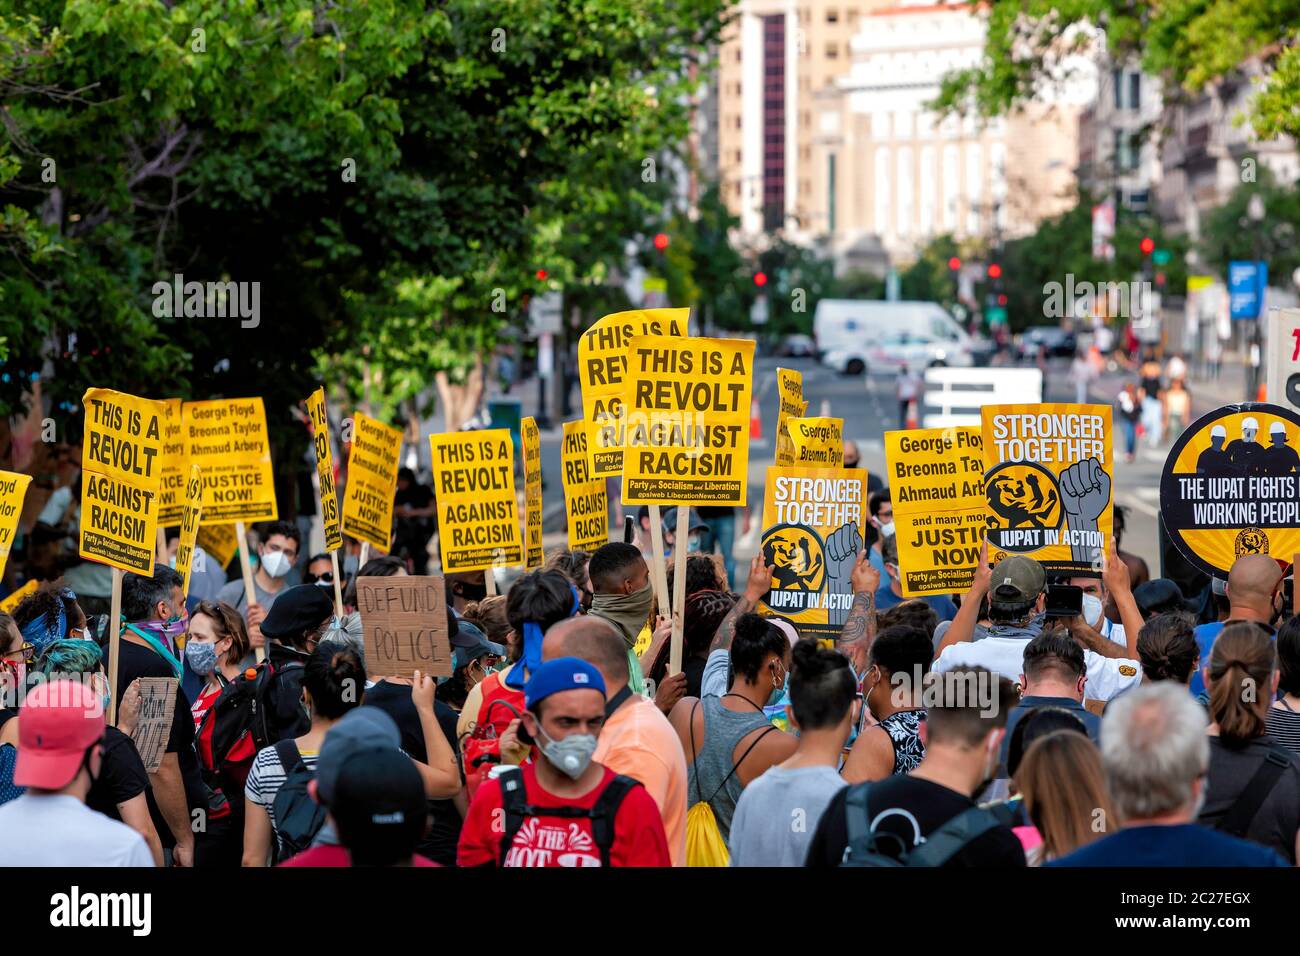 Protesters hold signs against racism and police brutality at anti-racist rally, Black Lives Matter Plaza, Washington, DC, United States Stock Photo